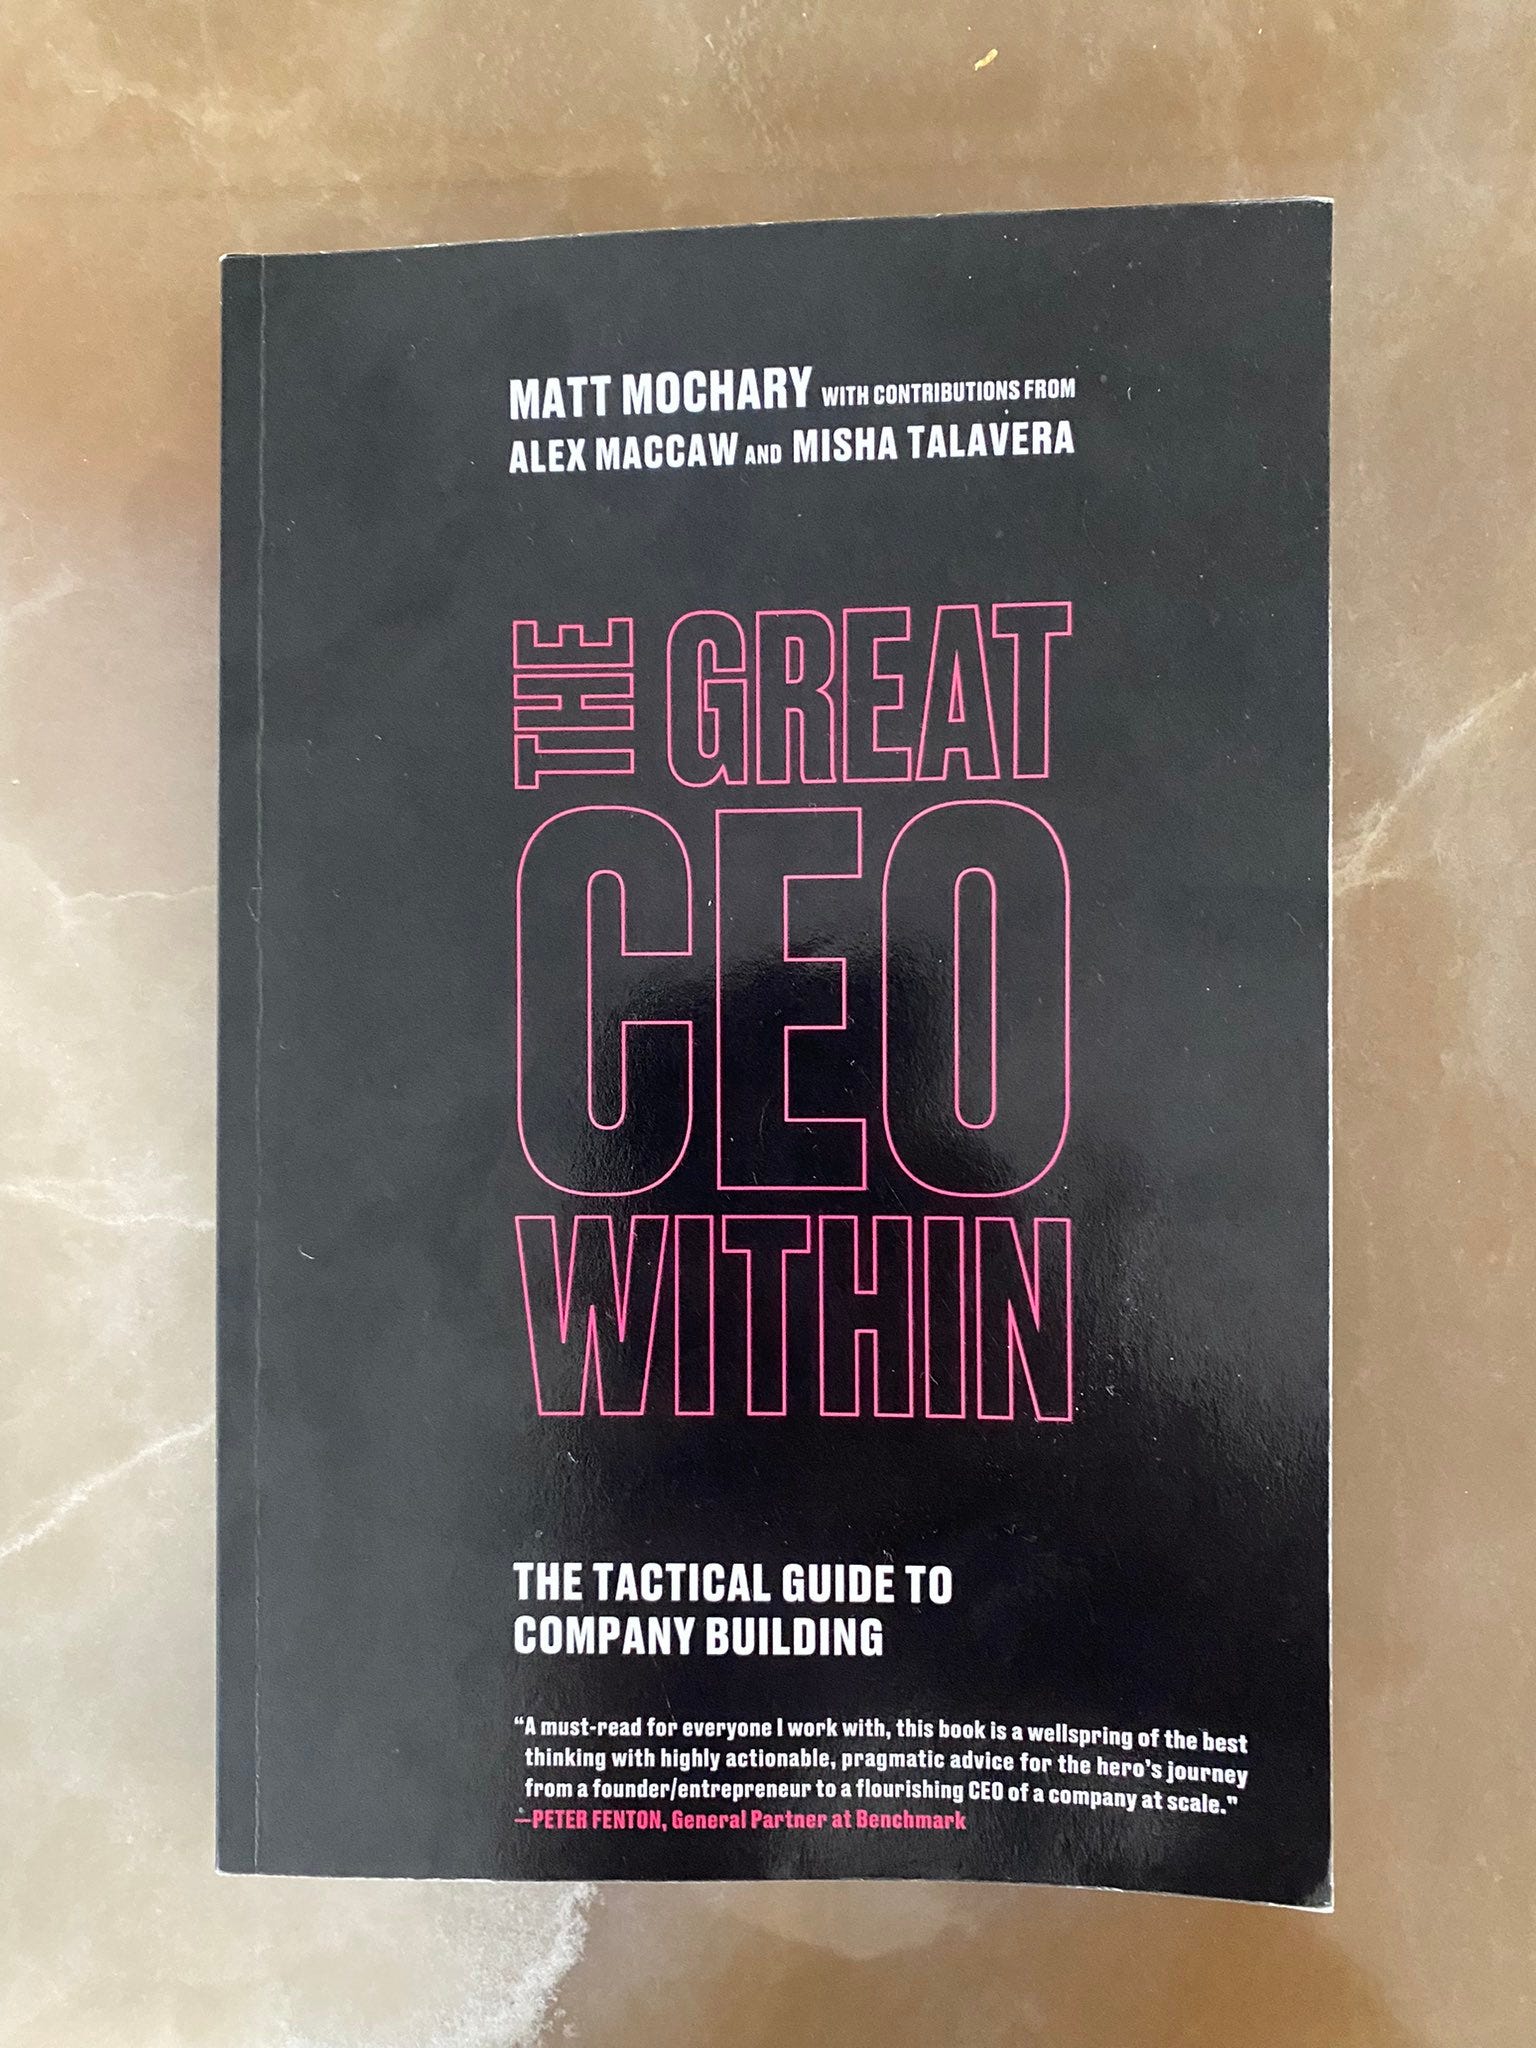 The Great CEO Within by Matt Mochary